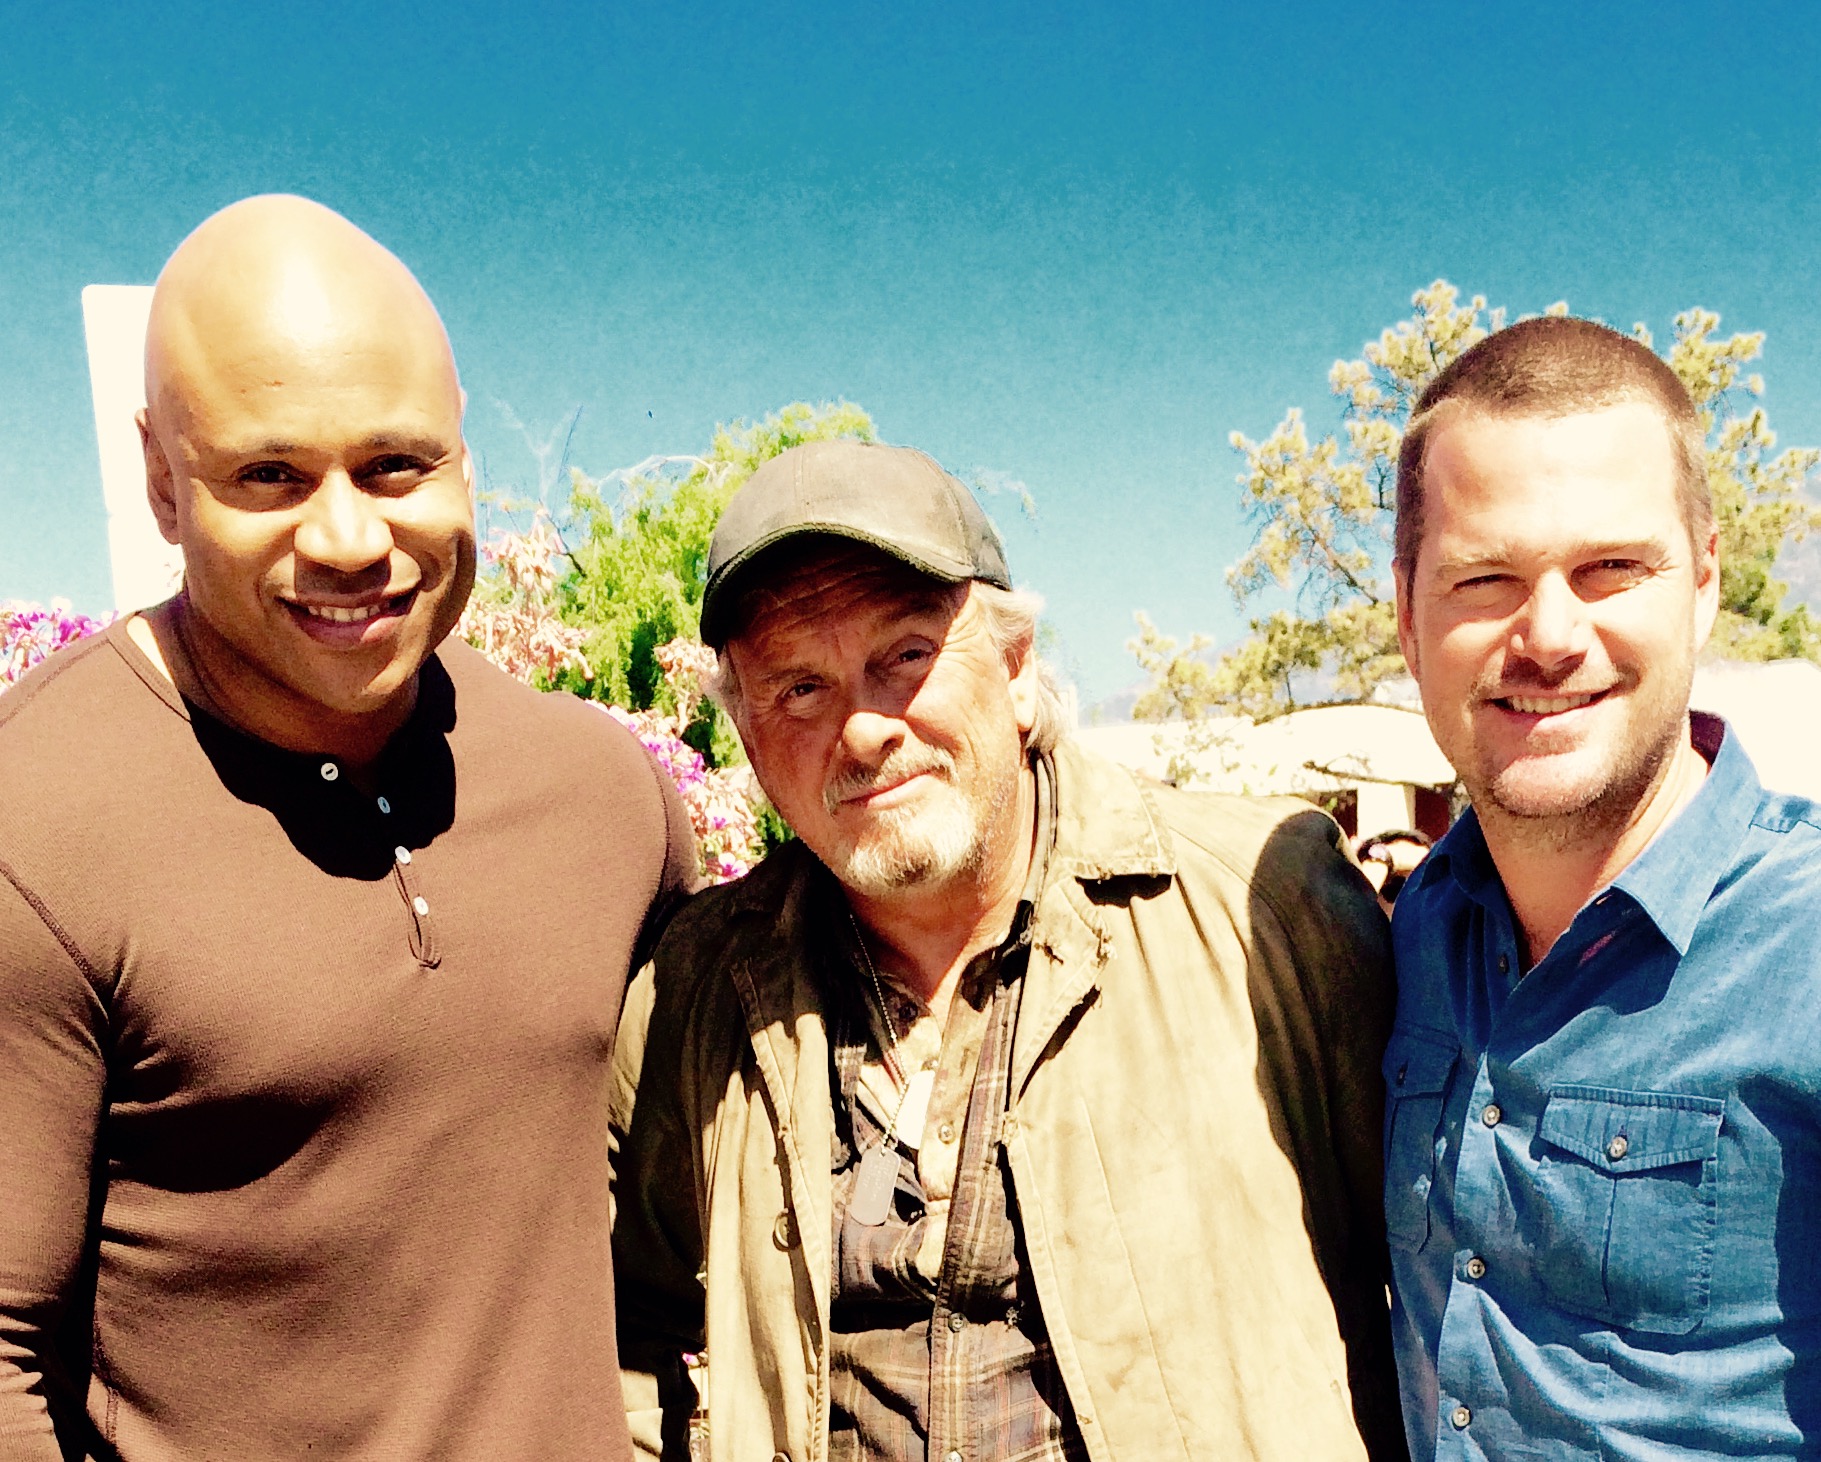 Robert Craighead with LL Cool J and Chris O'Donnell on set of NCIS: Los Angeles 2015